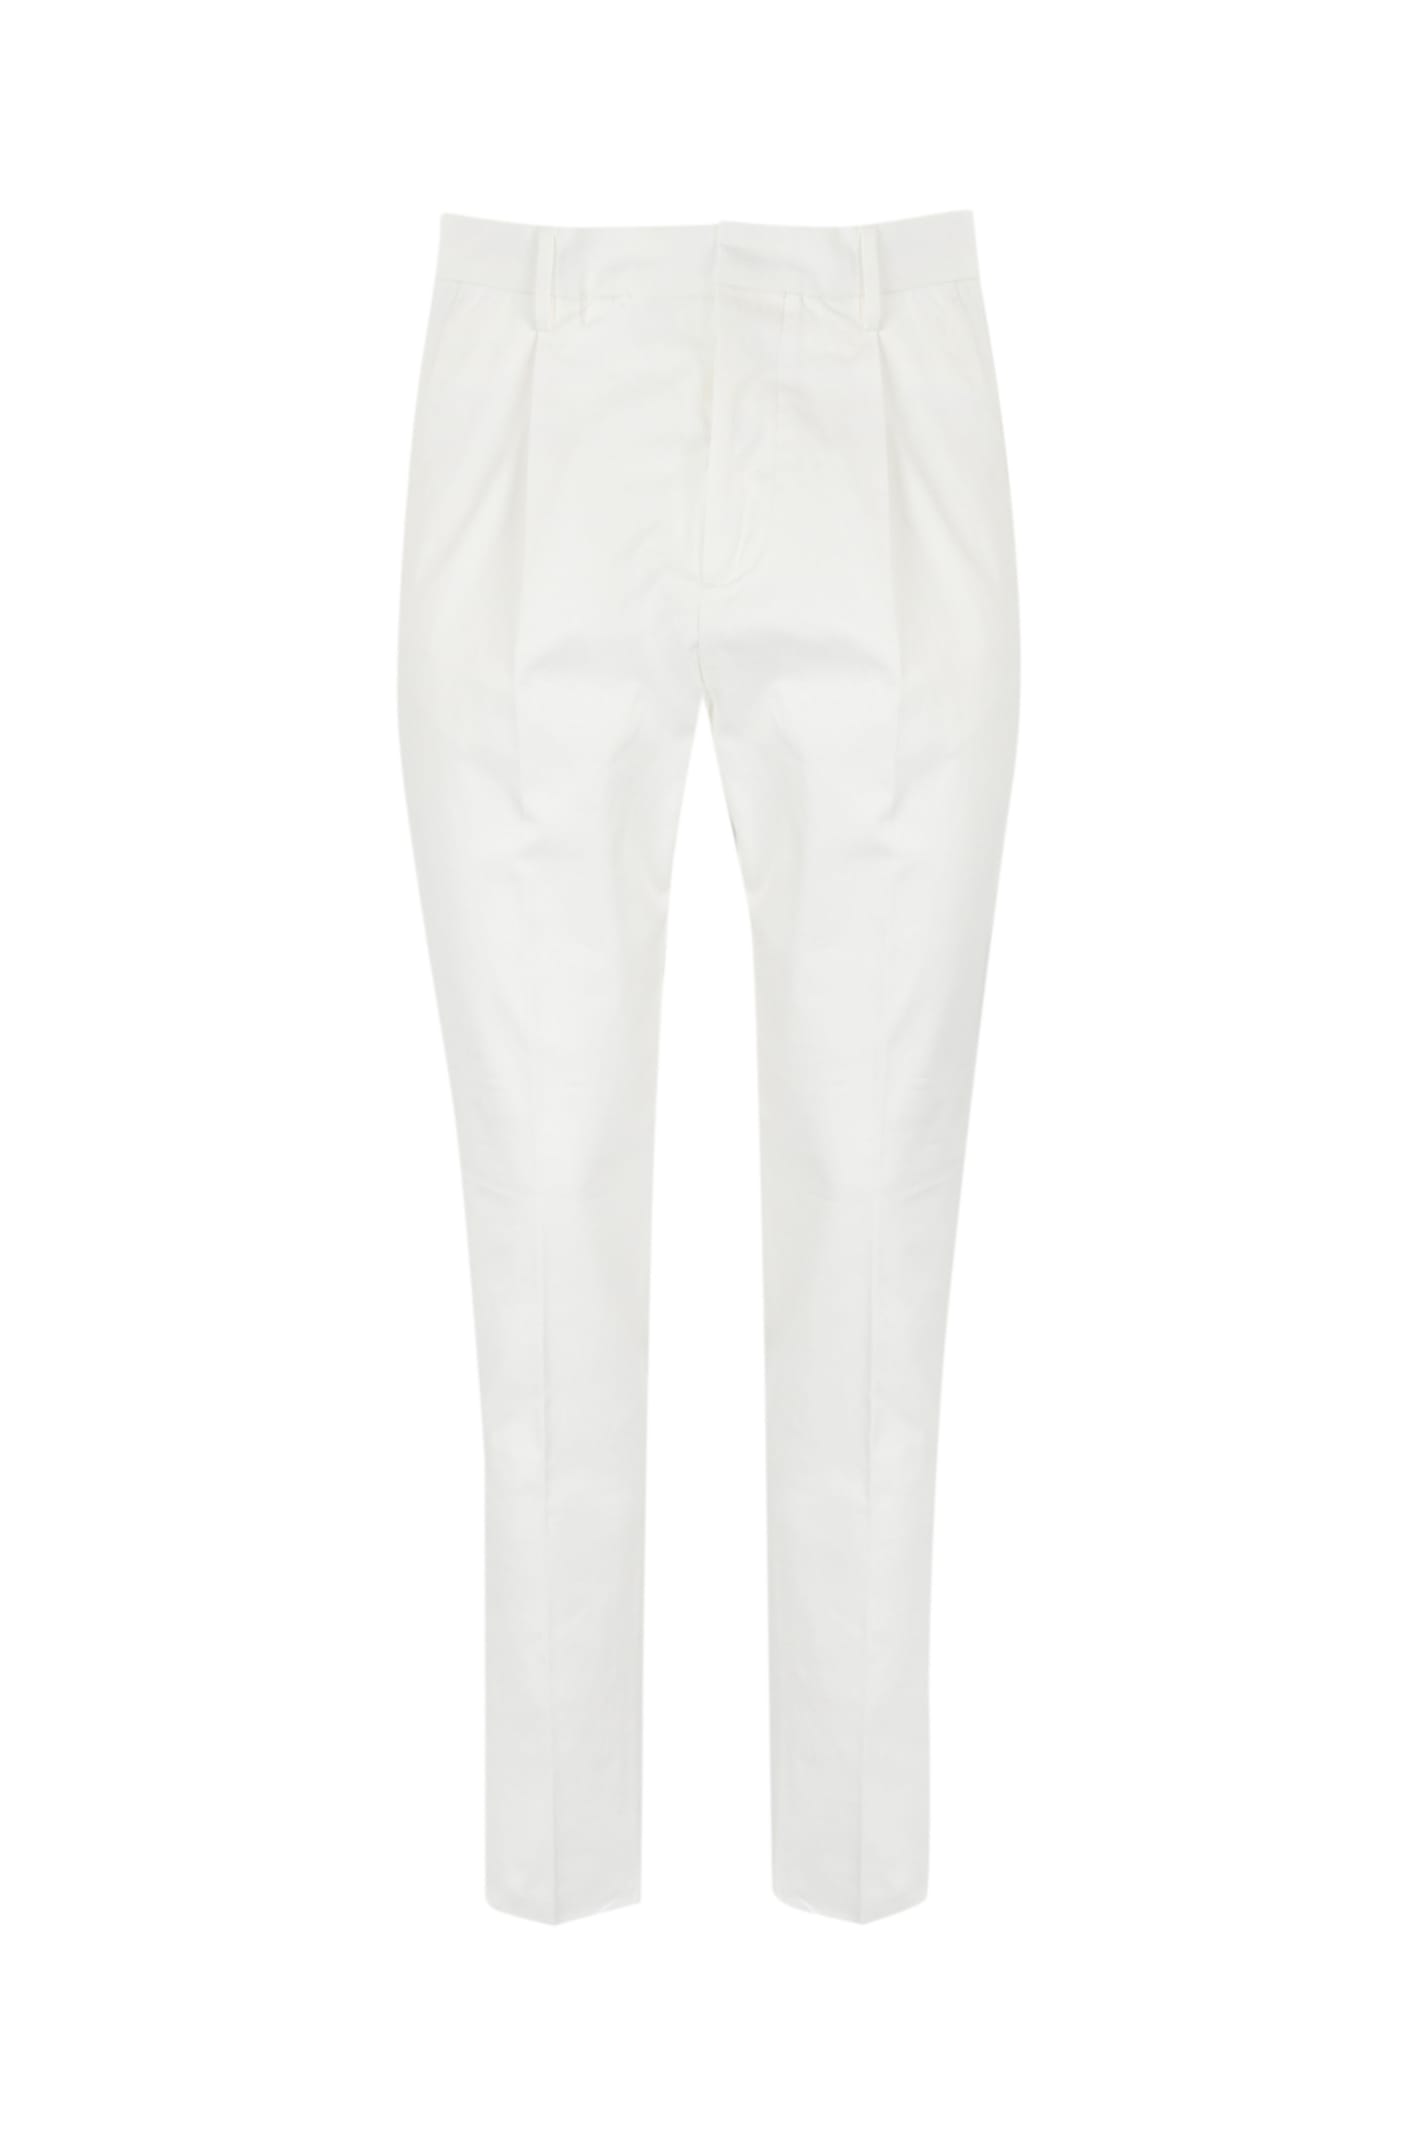 Dsquared2 Tailored Cotton Trousers In Bianco